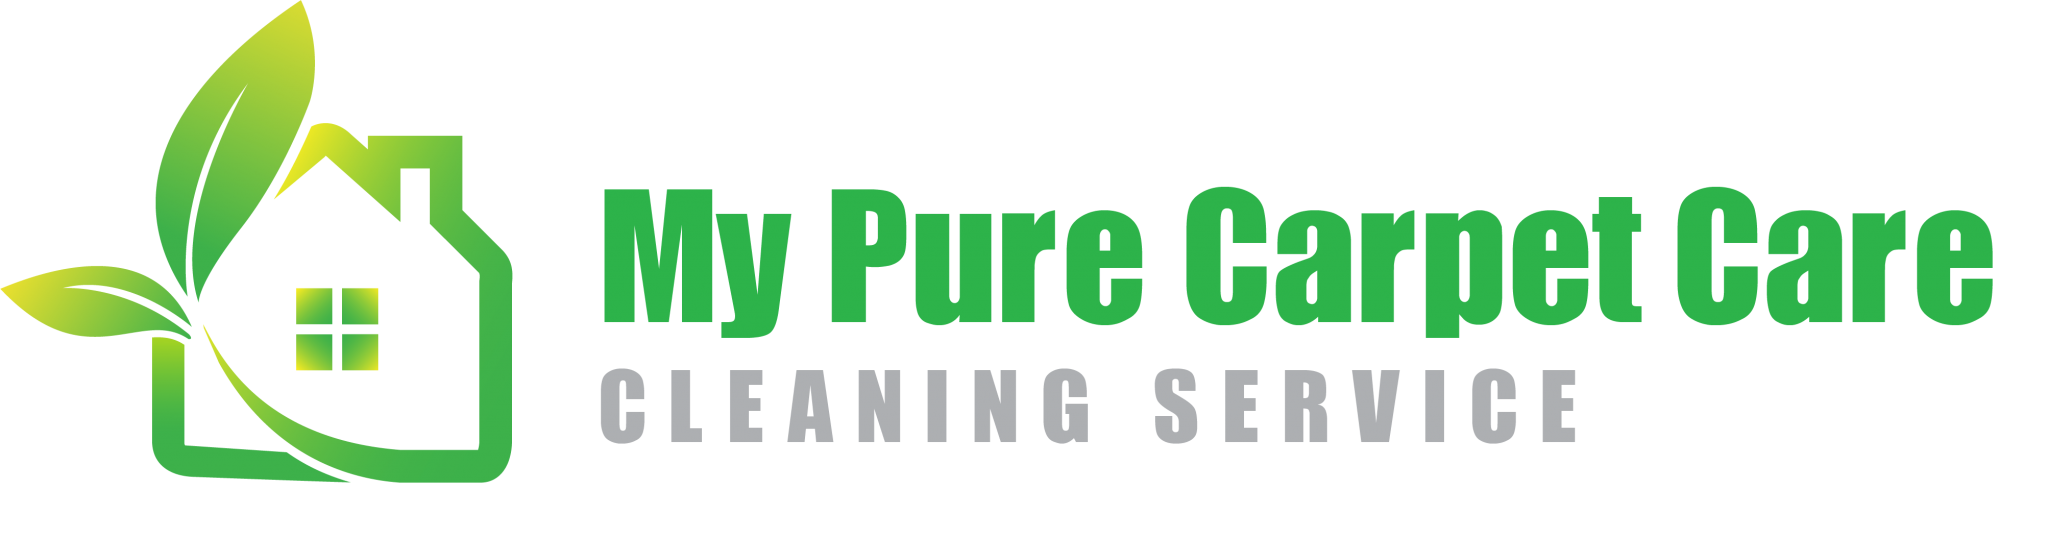 Carpet Cleaning Services - San Fernando Valley Announces COVID-19 Protocol Changes